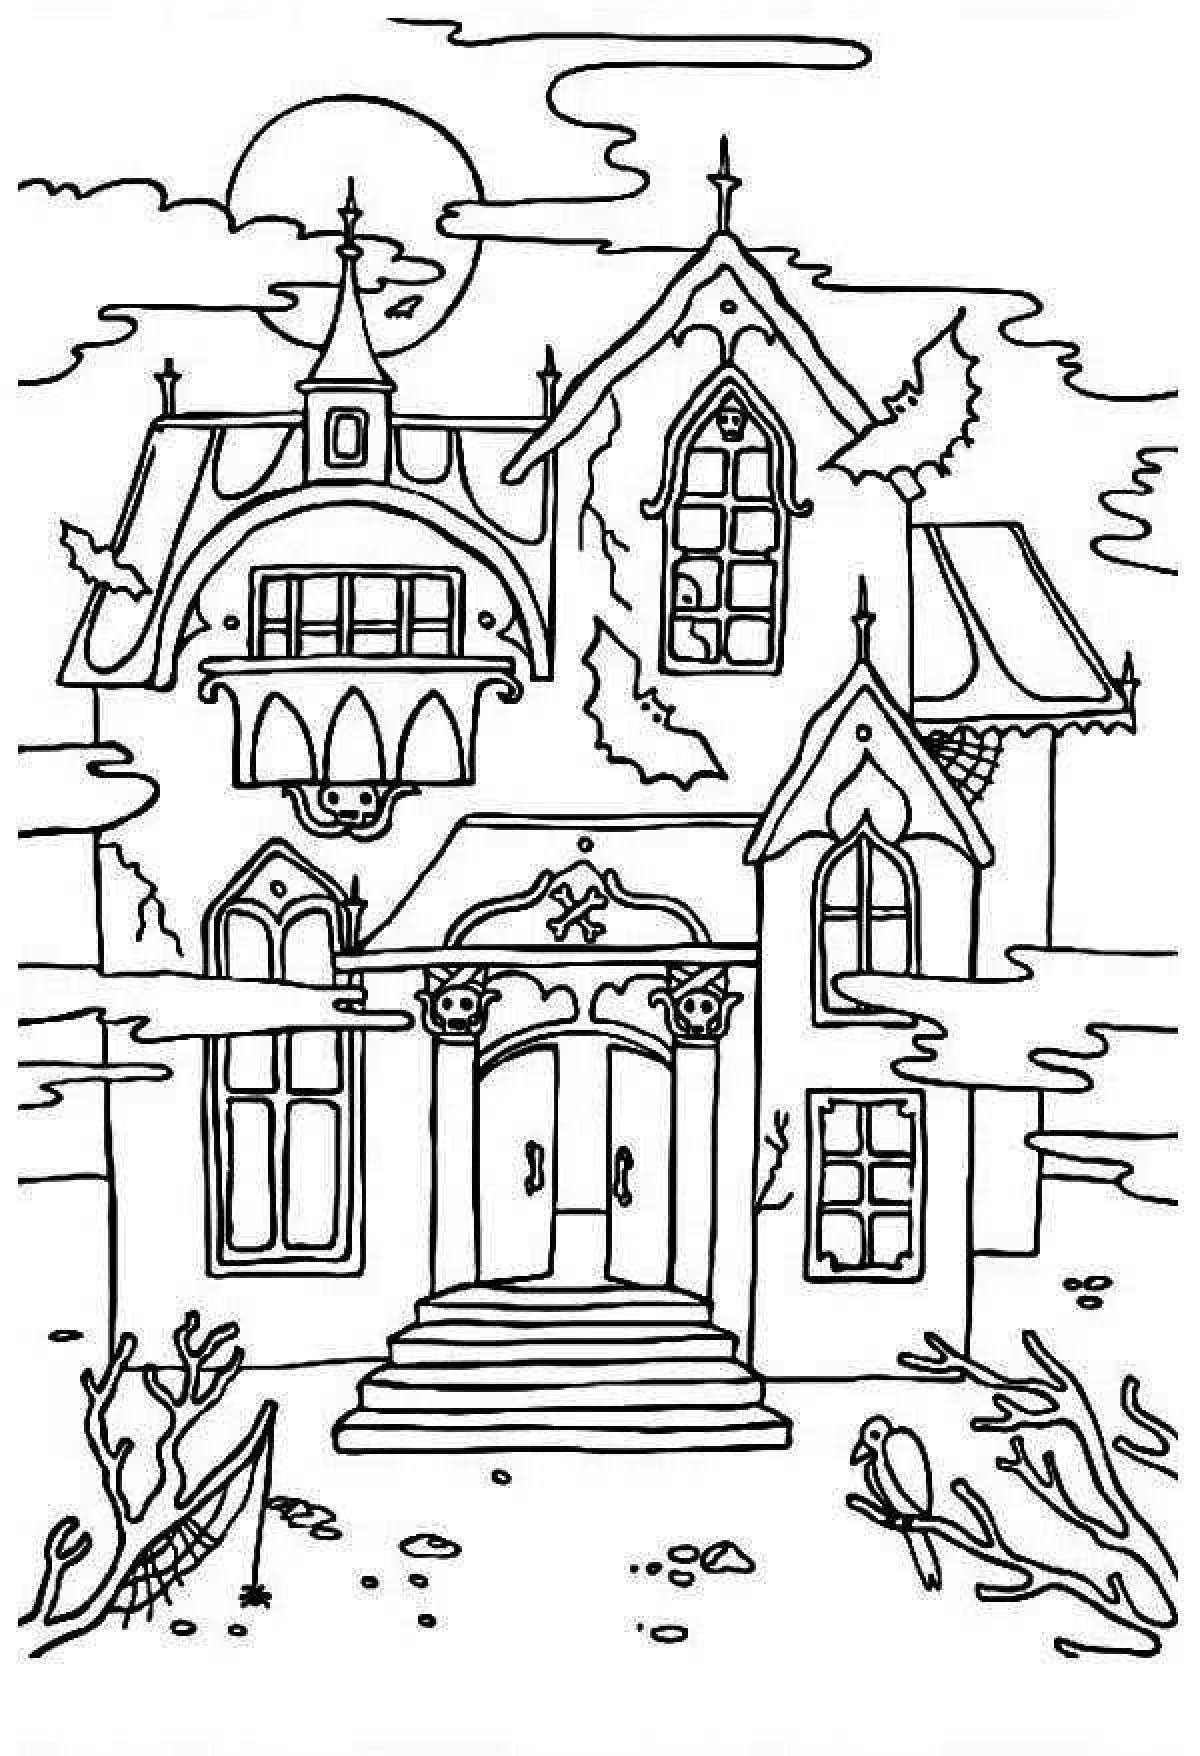 Coloring page sinister haunted house